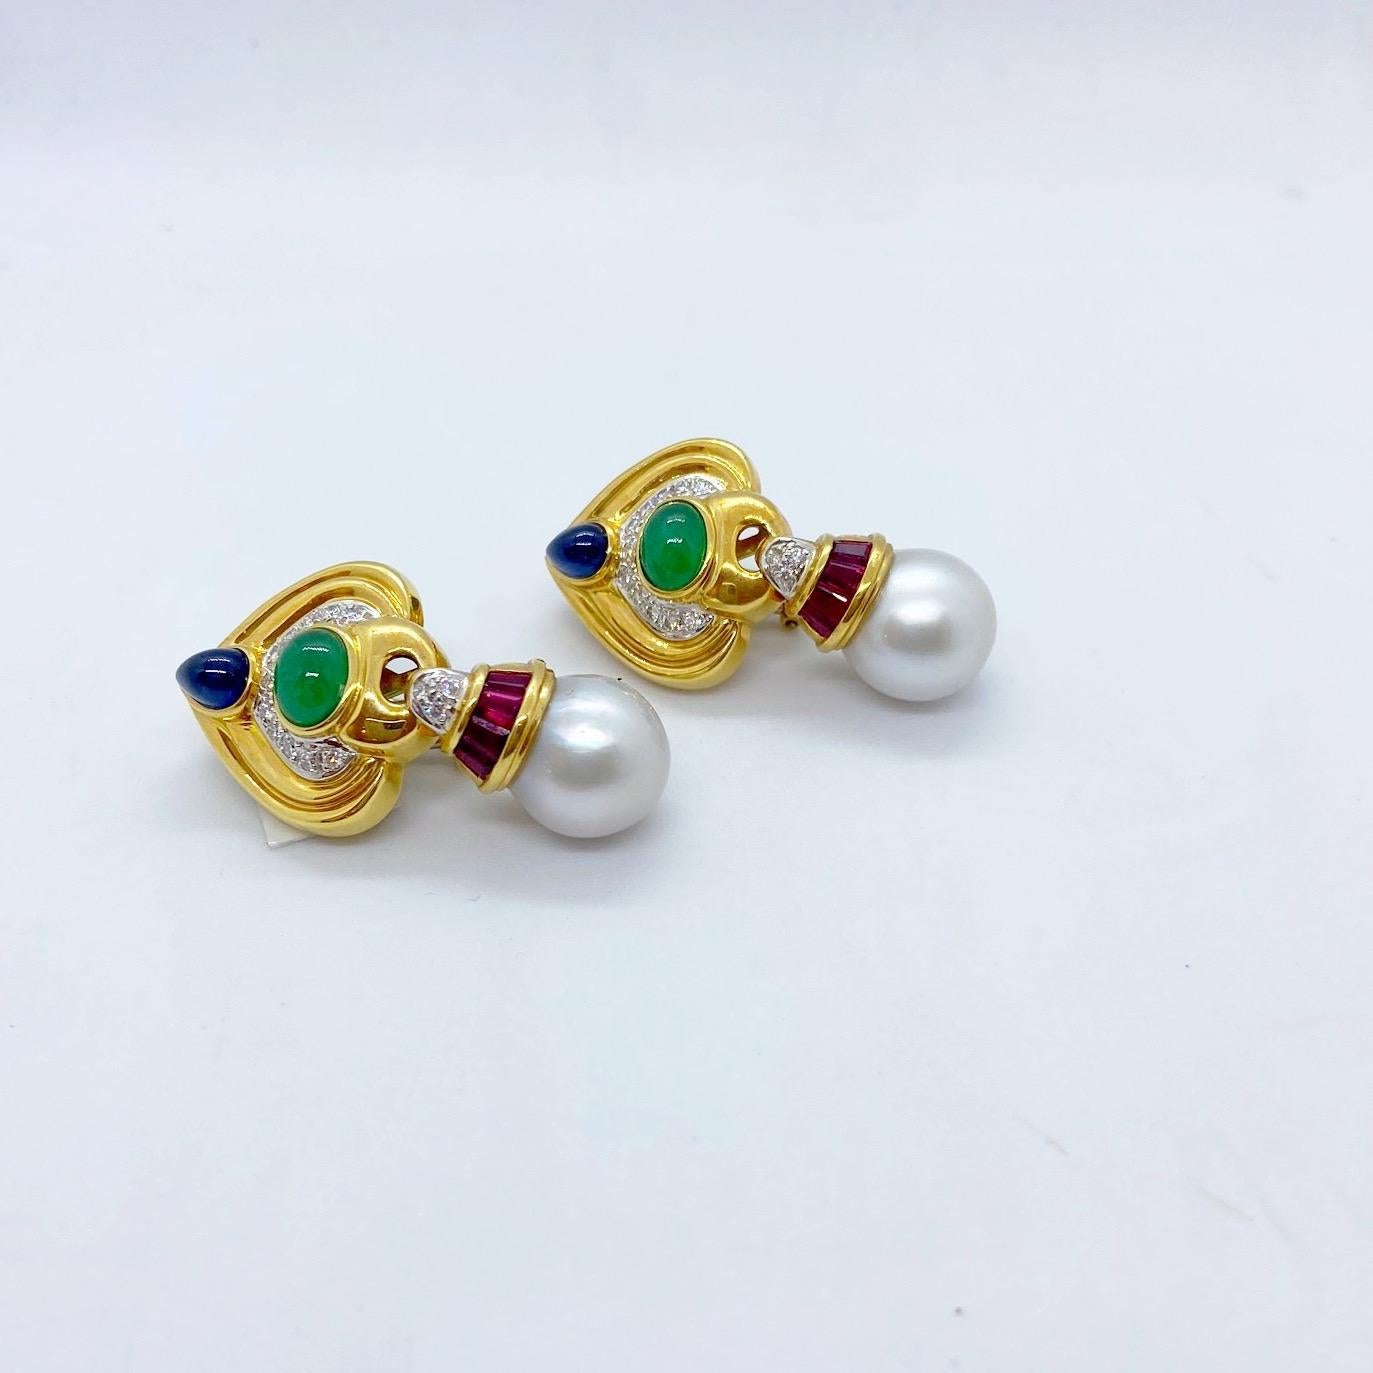 18 karat yellow gold hanging earrings. The top portion of these beautiful earrings are set with a Pear Shaped Cabochon Blue Sapphire and a Oval Cabochon Emerald, along with a row of Round Brilliant Diamonds. A 13mm South Sea Pearl with a Baguette